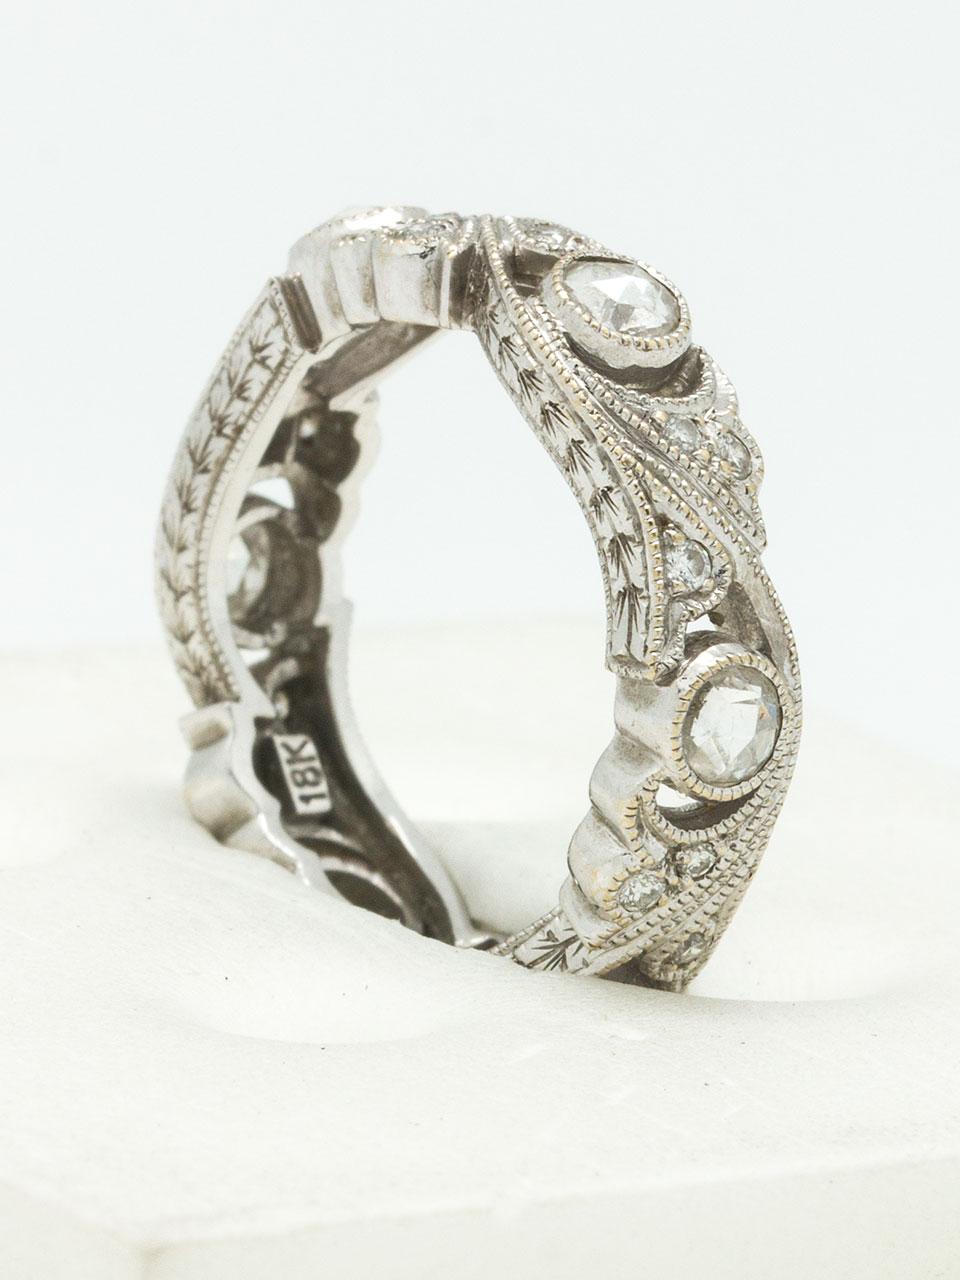 18K White gold & diamond vintage style eternity band set with six bezel set rose cut diamonds & 18 bead set round diamonds in a floral design. Approximate total of 0.60ctw. 5mm wide, Size 6, unable to adjust. Circa 2000s.

SKU: 37204